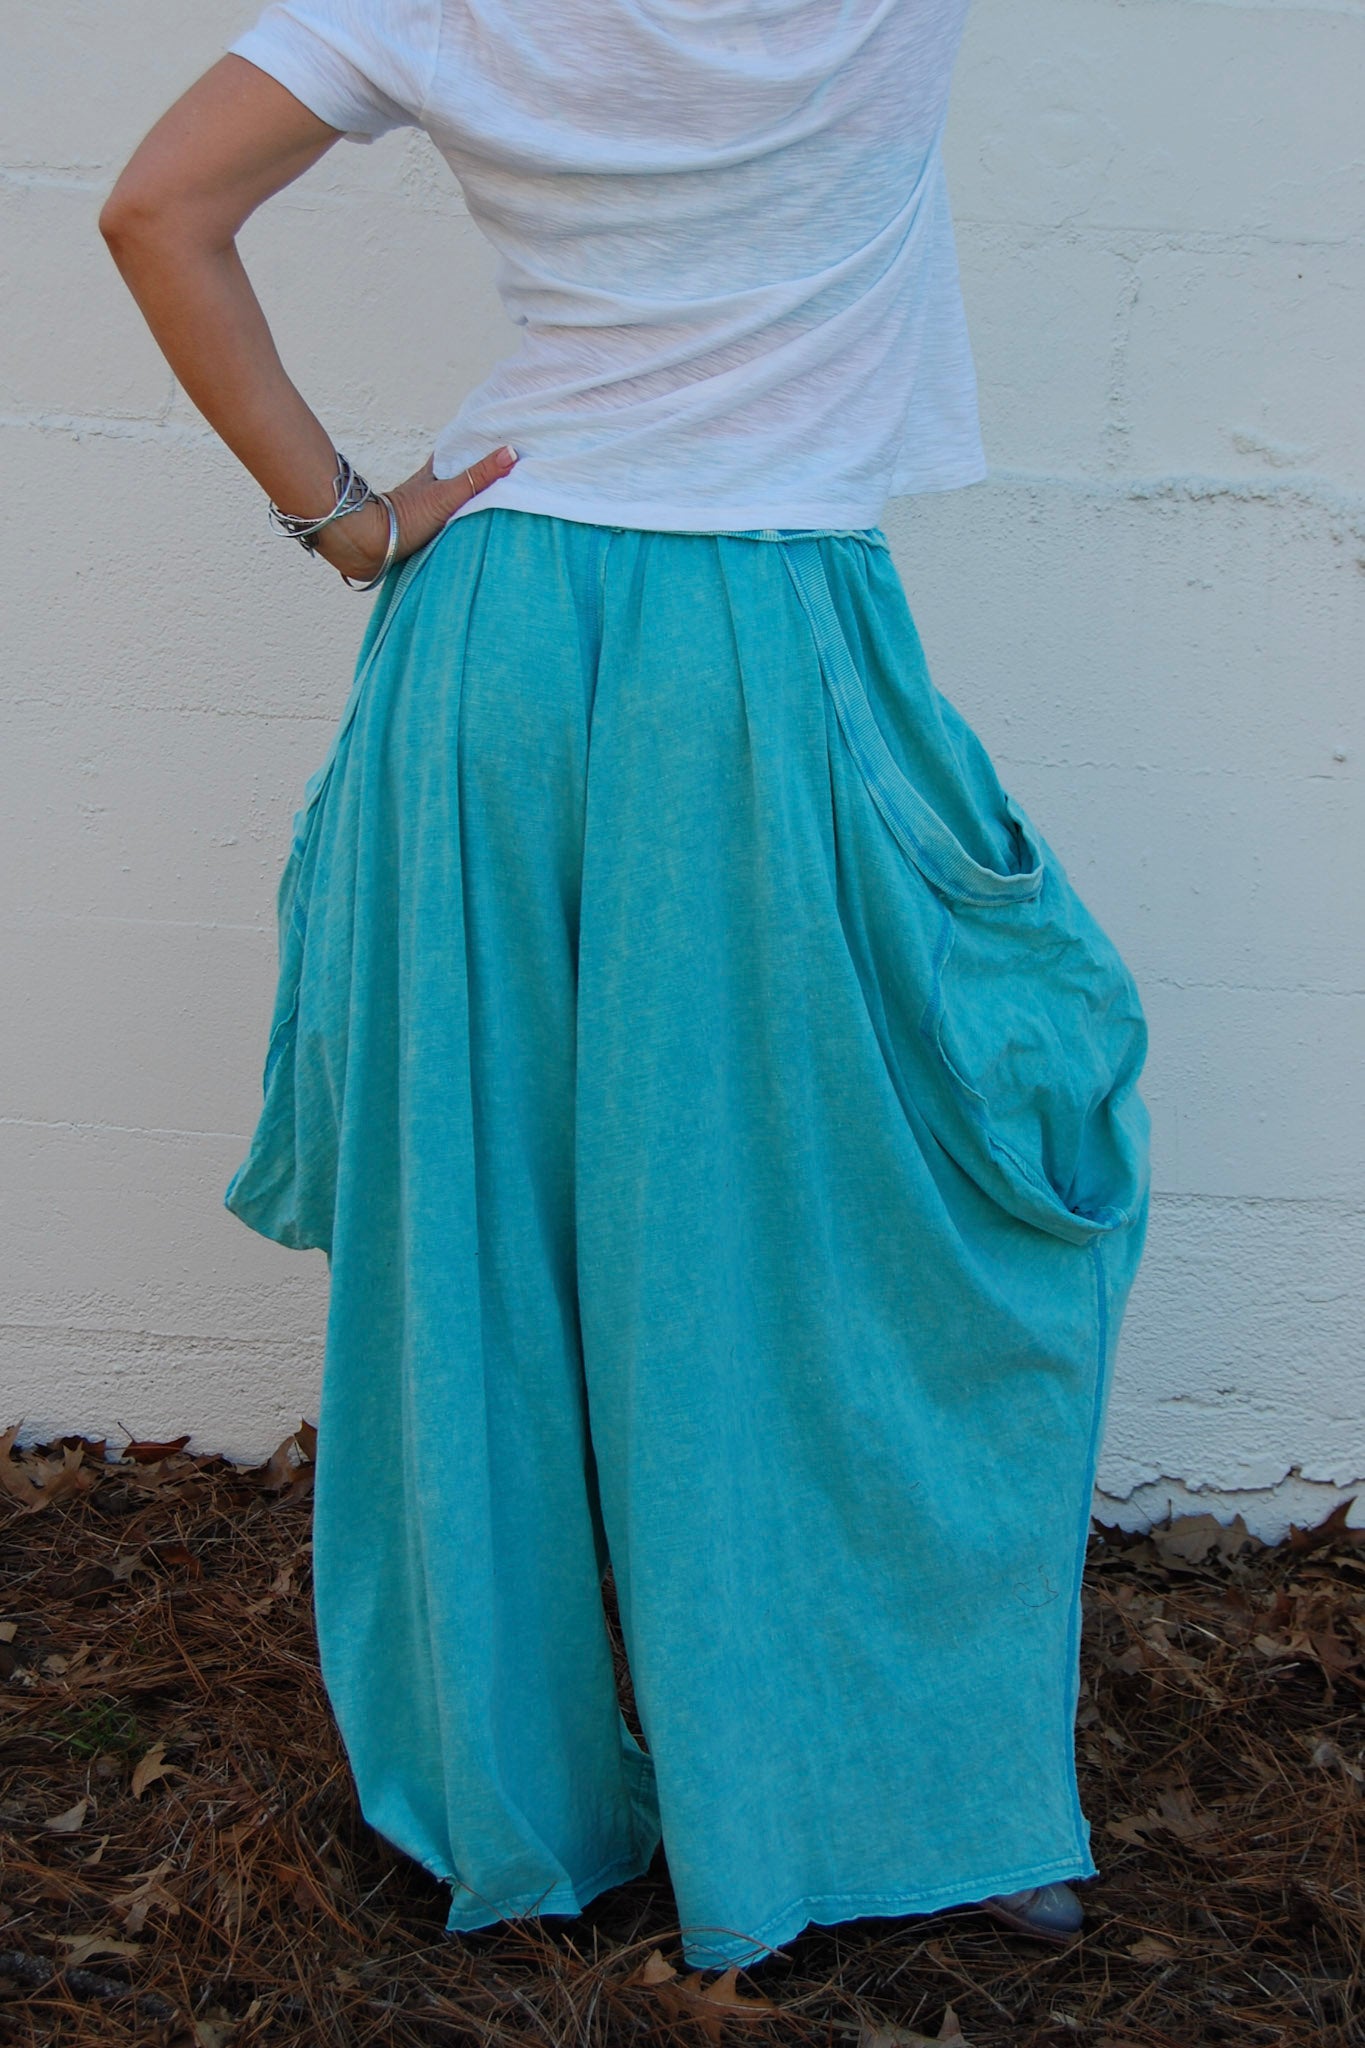 Jetty Harem Pants in Turquoise